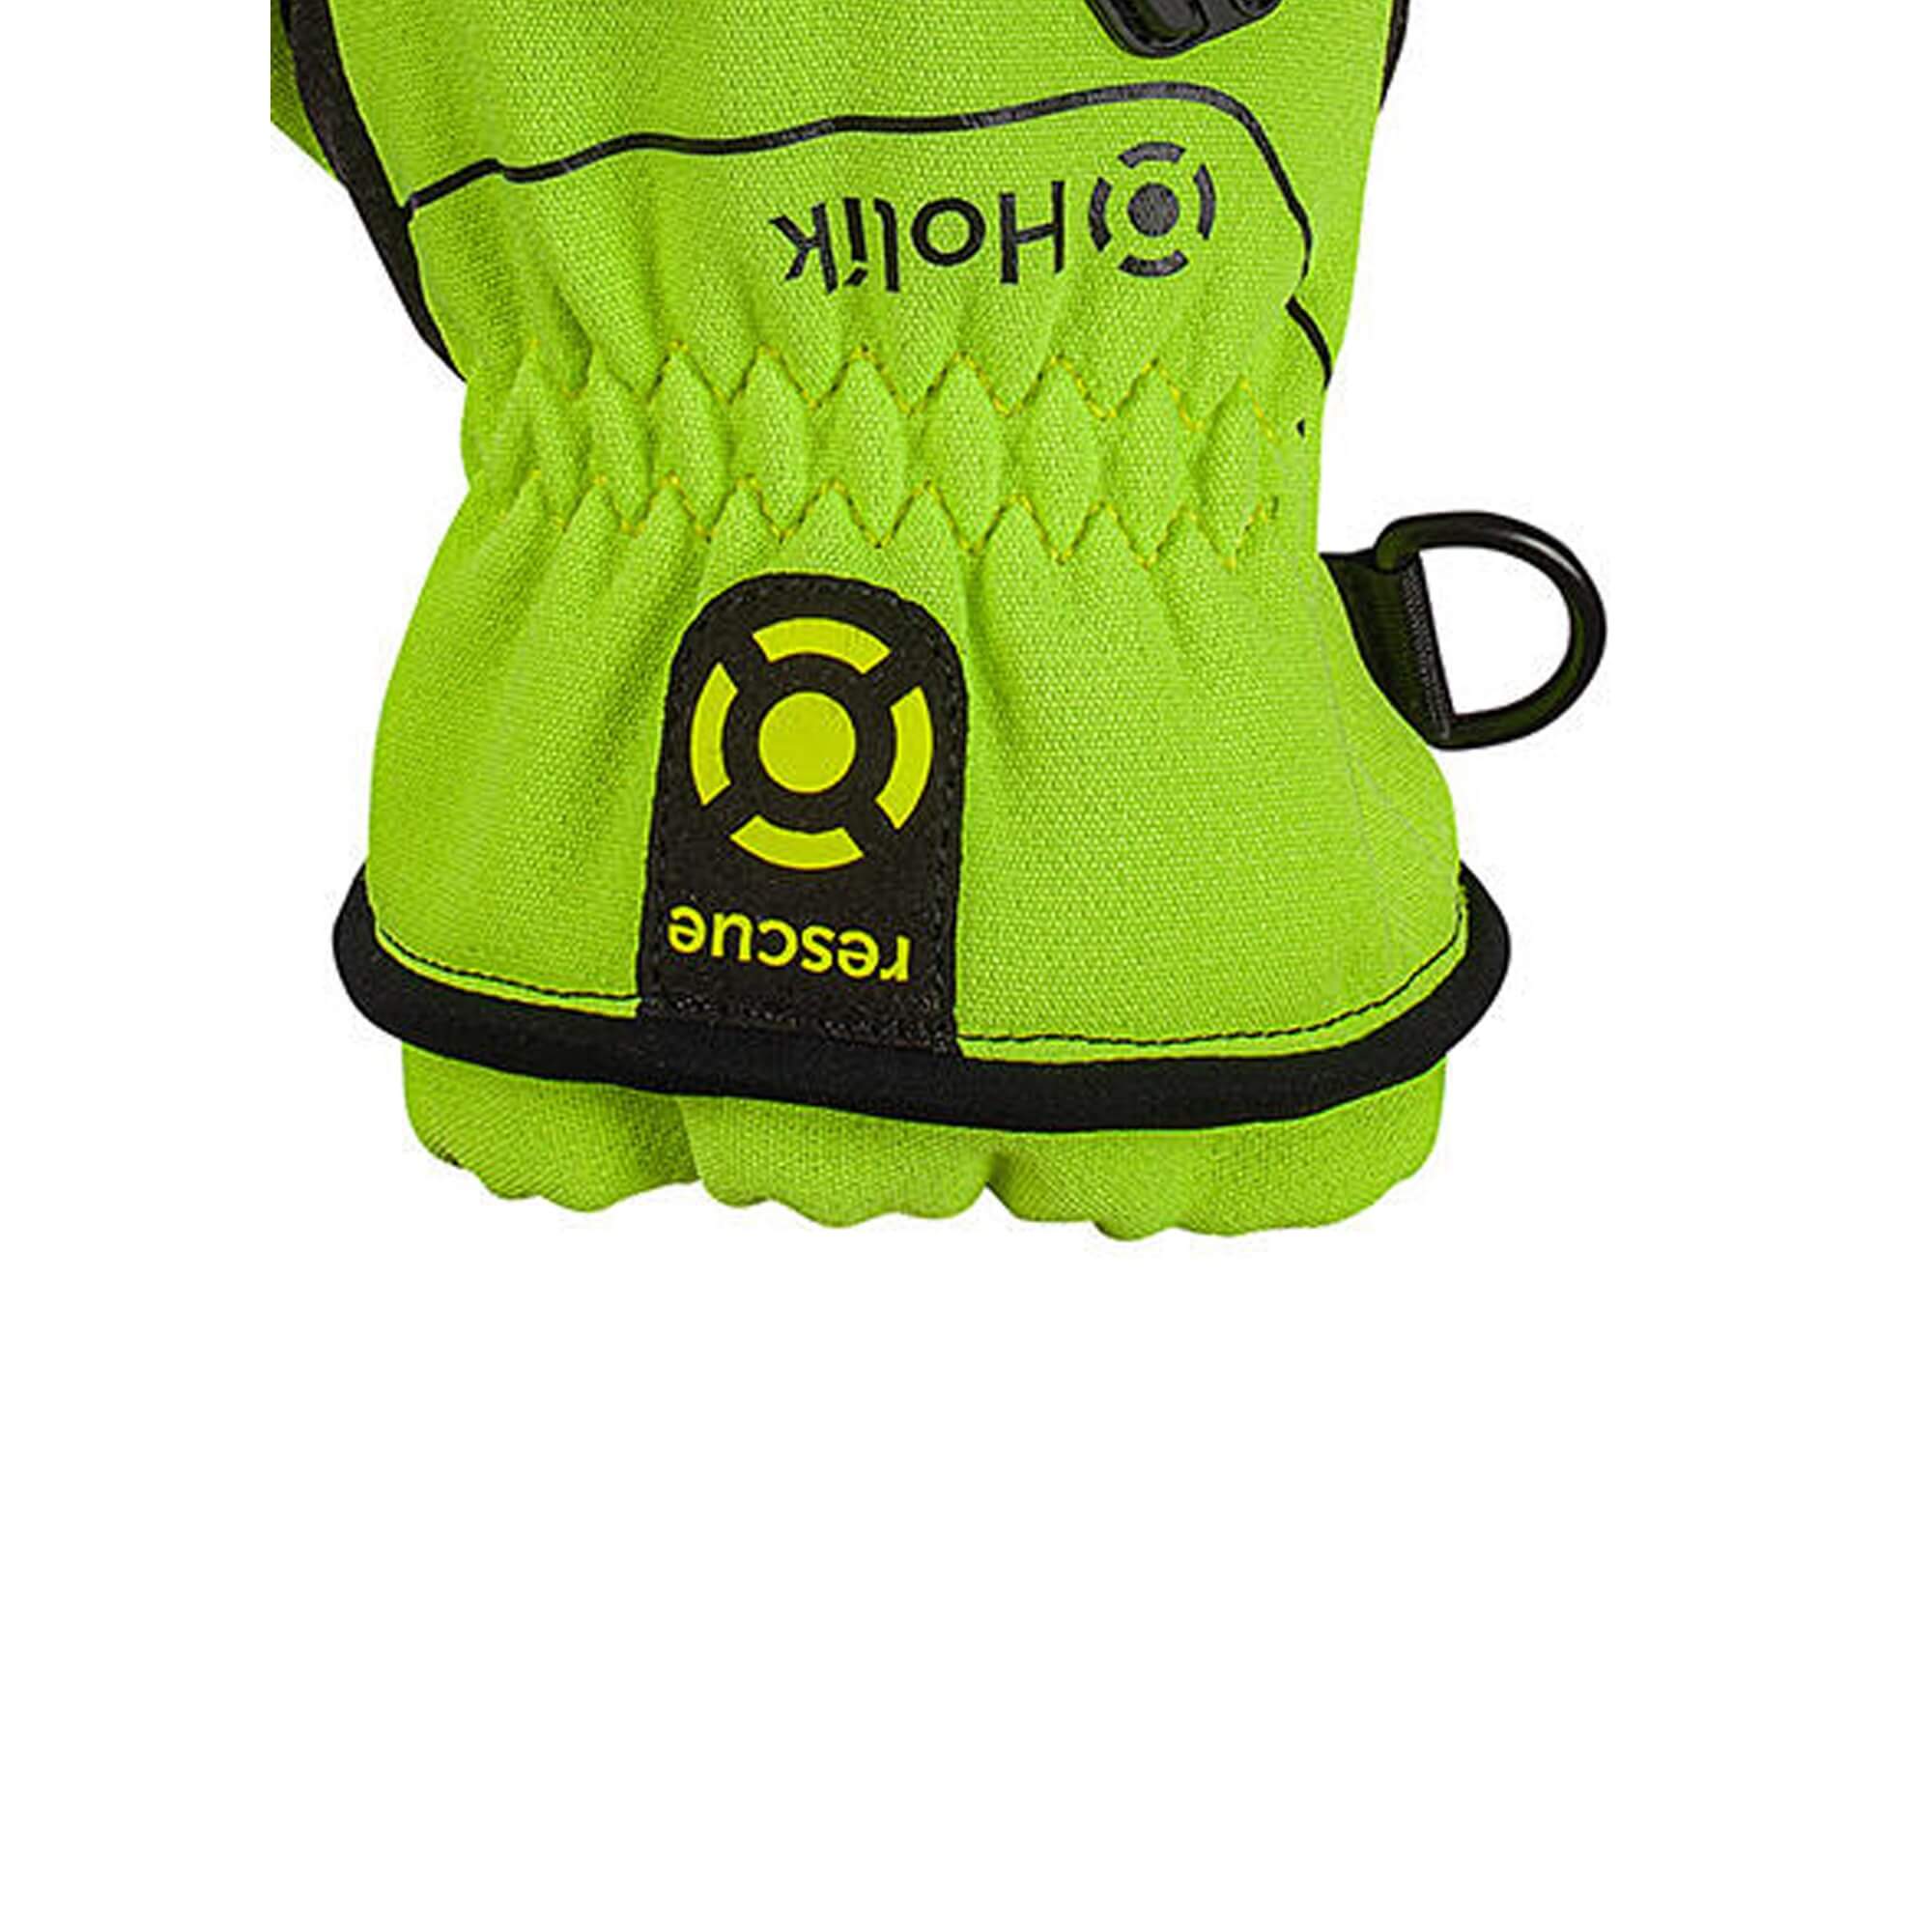 Emergency gloves for Firefighters and Rescuers Blaze Evo